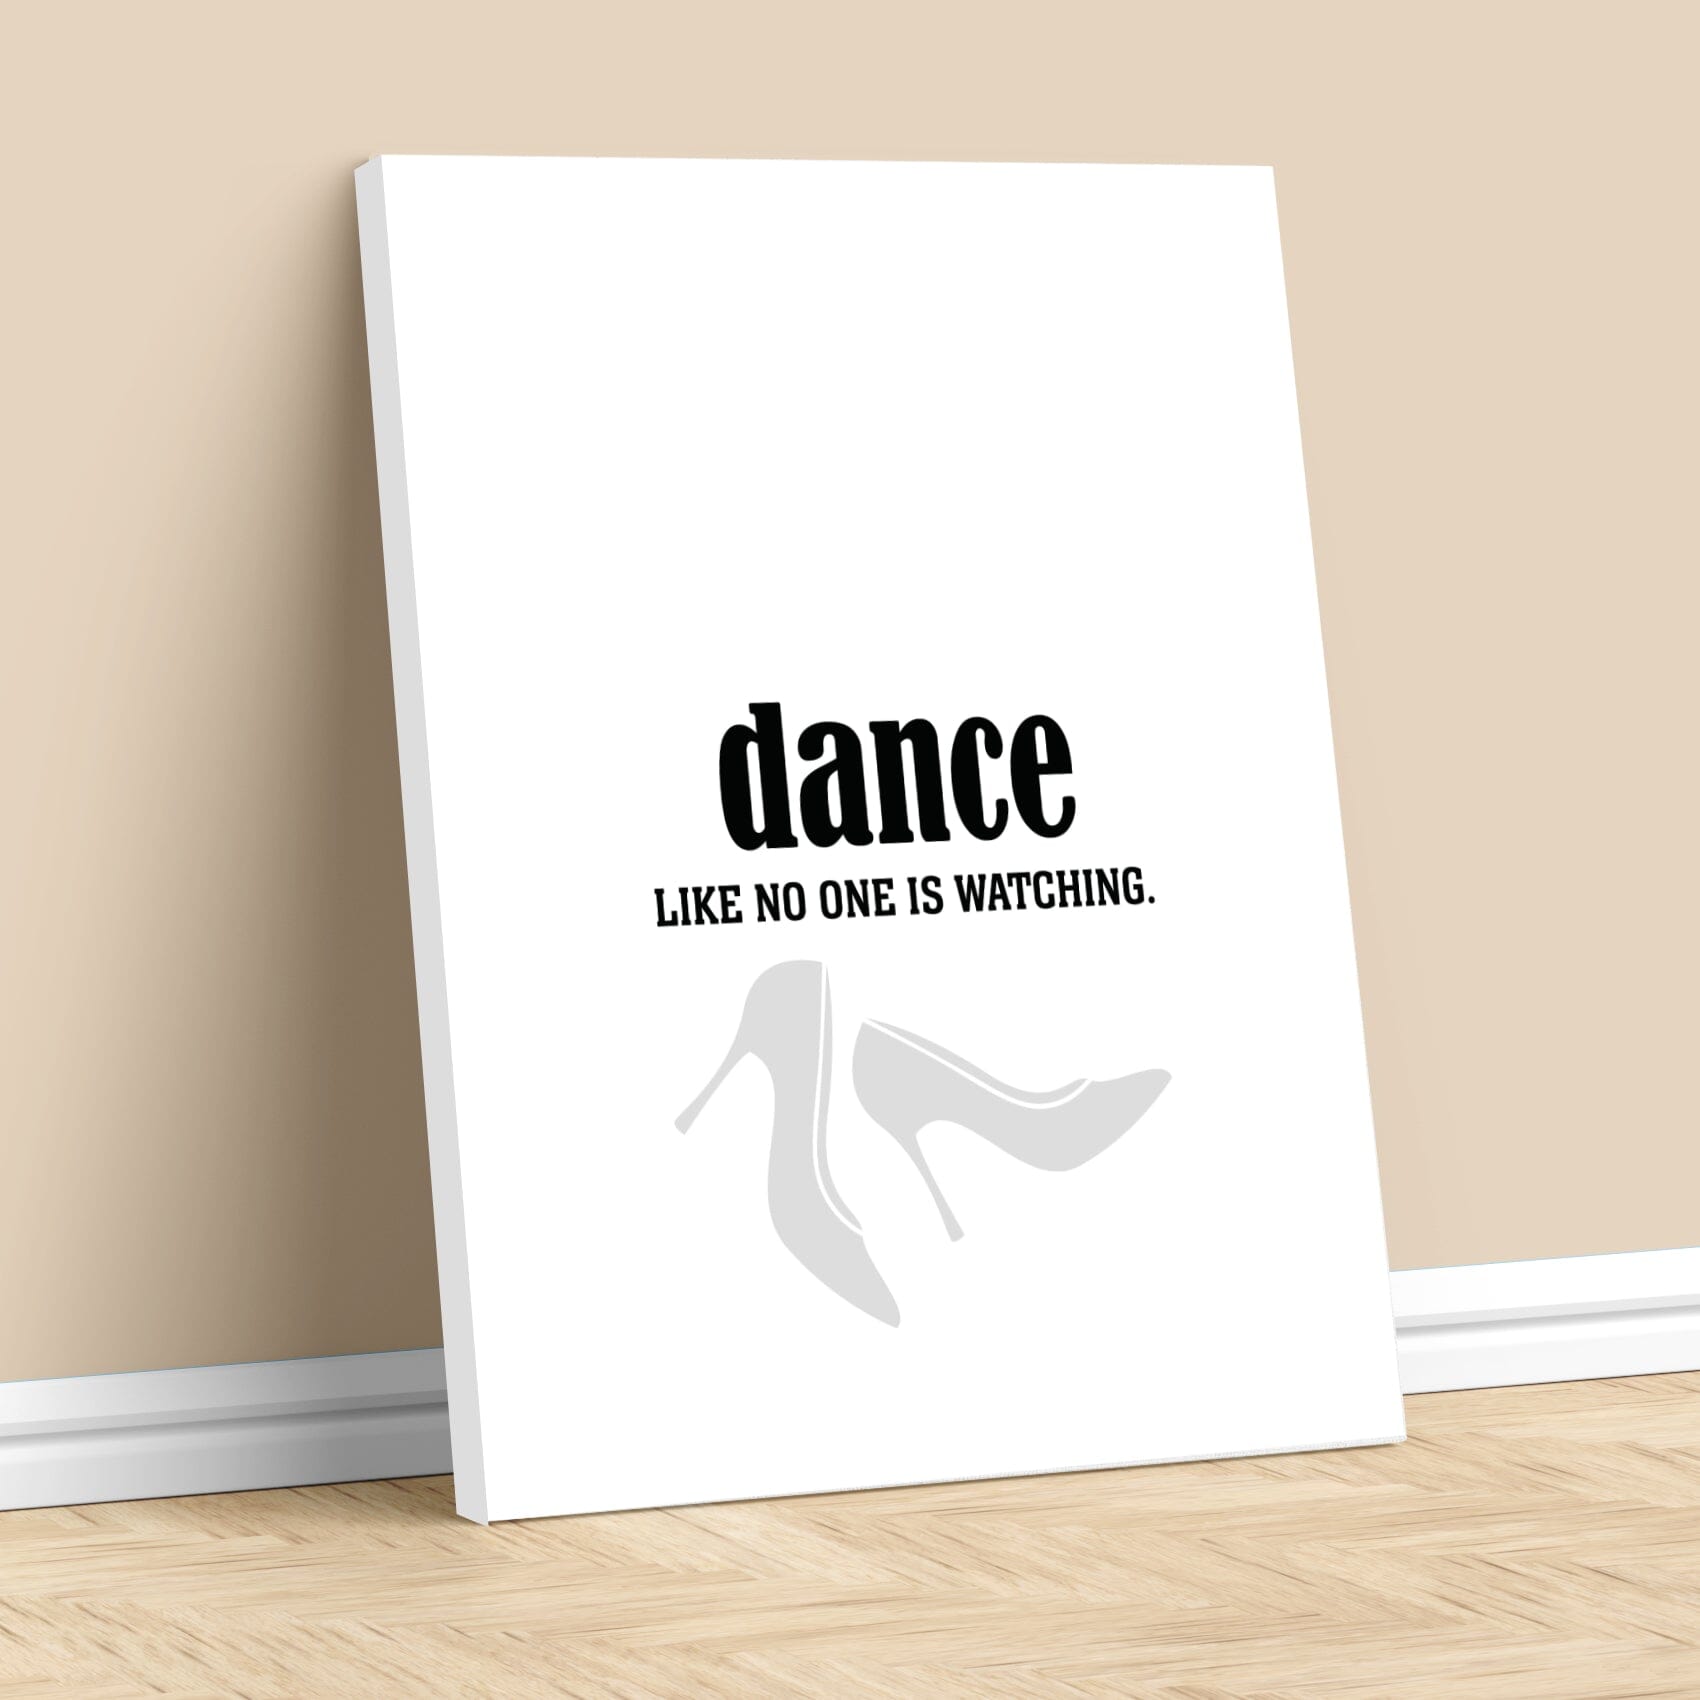 Dance Like No One is Watching - Wise and Witty Art Print Wise and Wiseass Quotes Song Lyrics Art 11x14 Canvas Wrap 